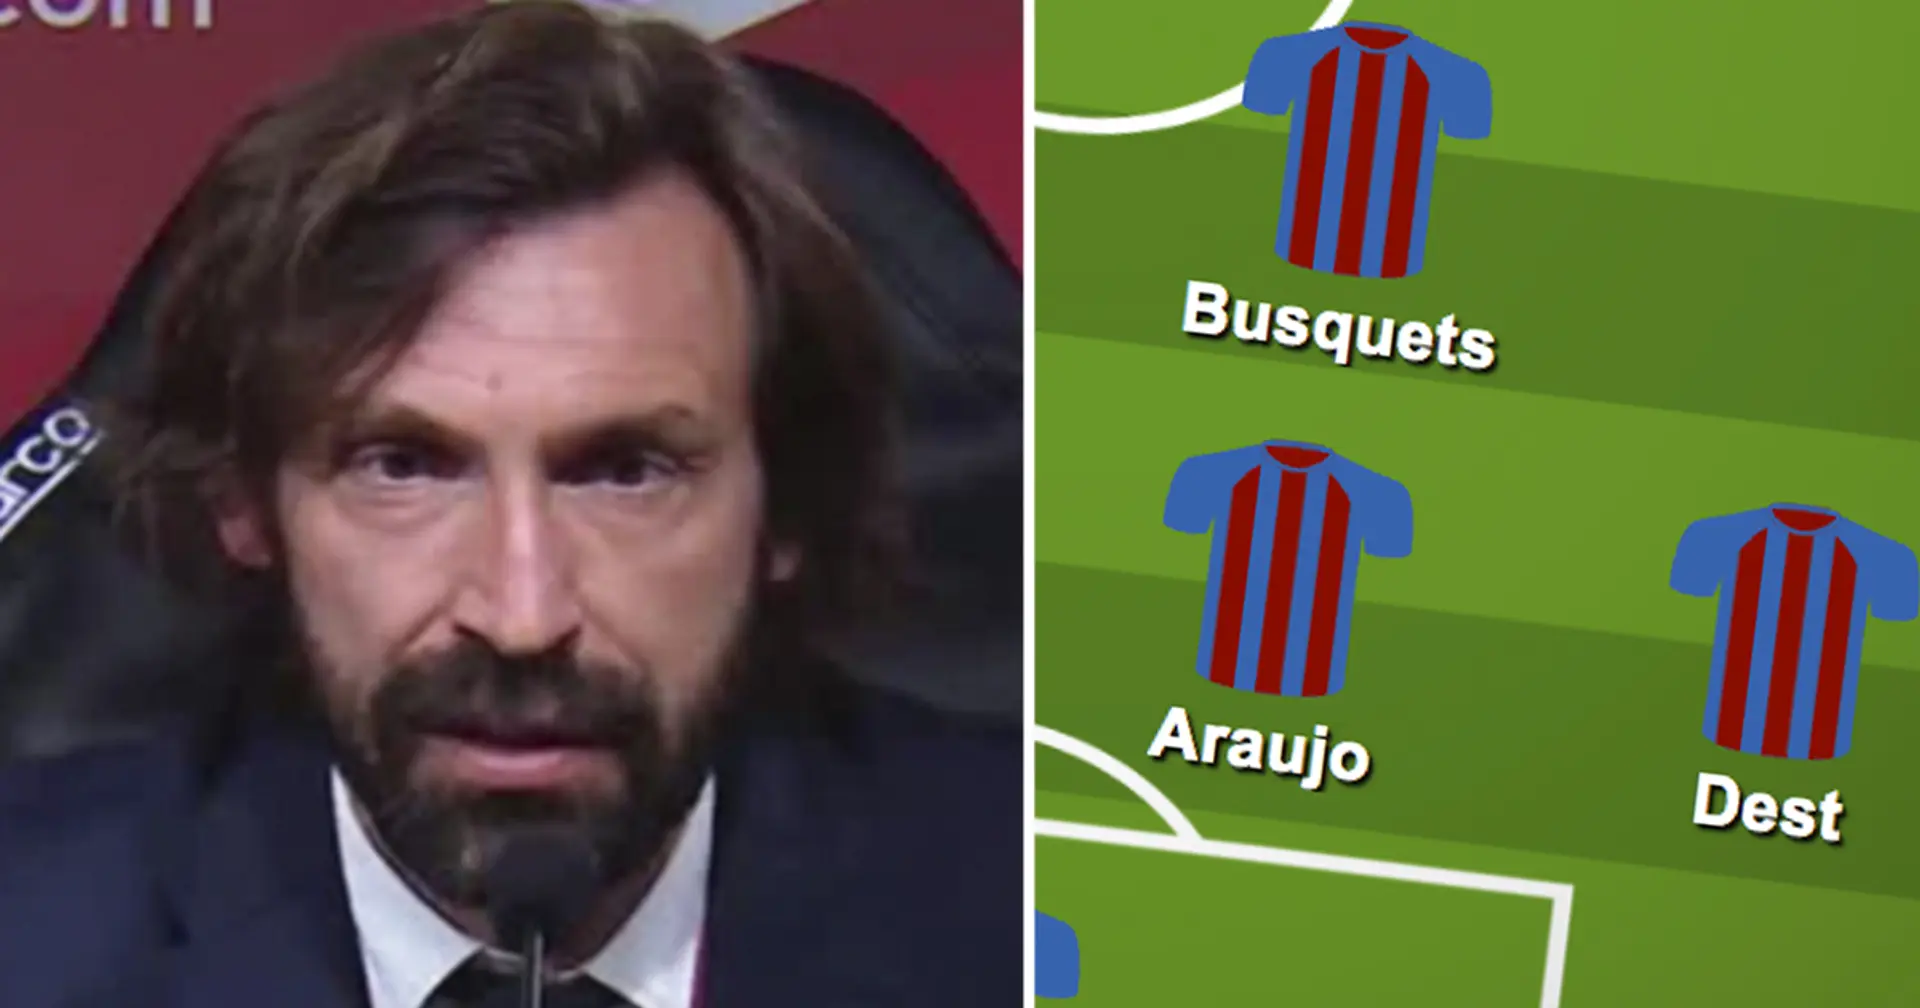 How Andrea Pirlo could line up at Barca – based on his Juventus experience